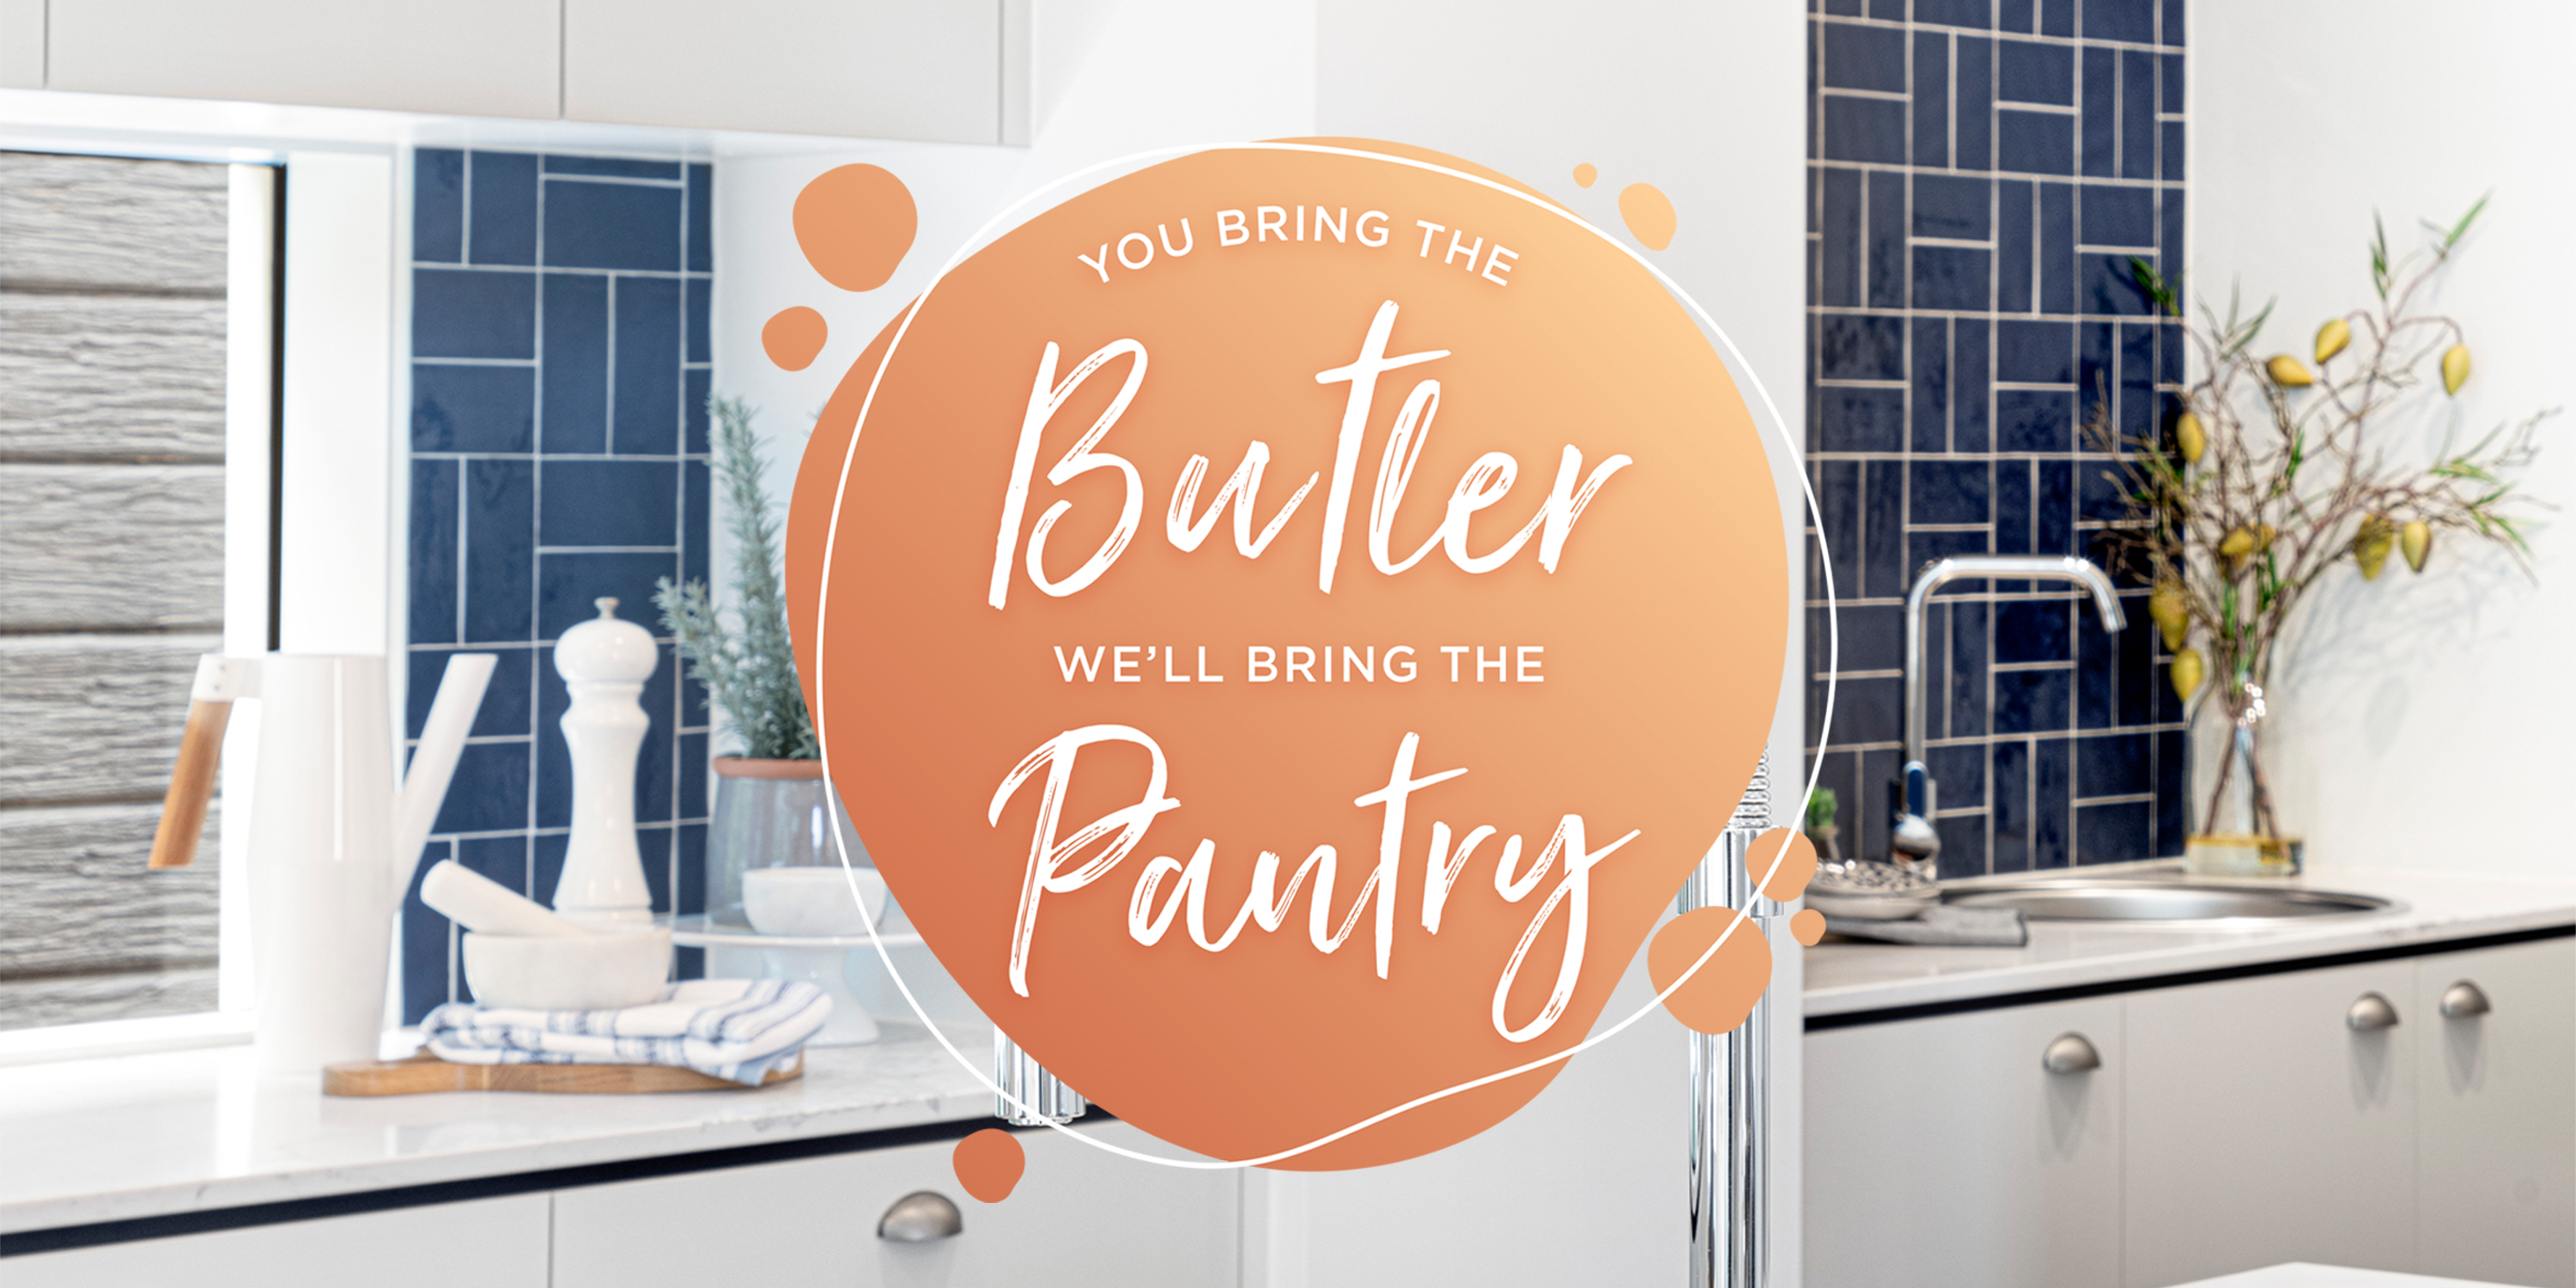 Bring the Butler - Landing Page